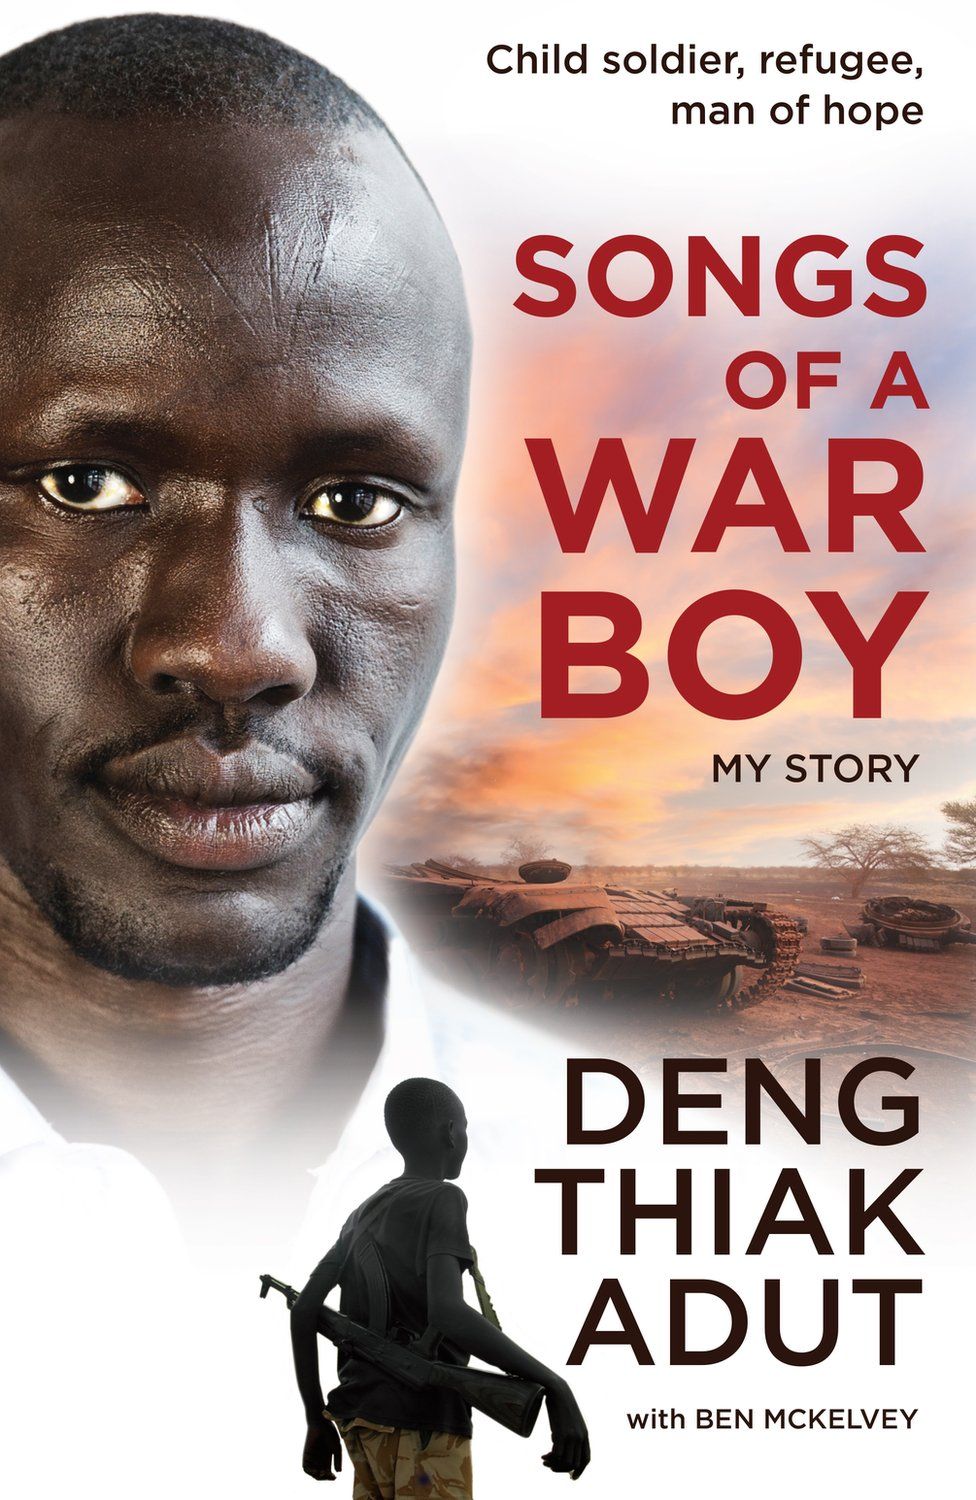 The cover image from Deng Adut's book Songs of a War Boy